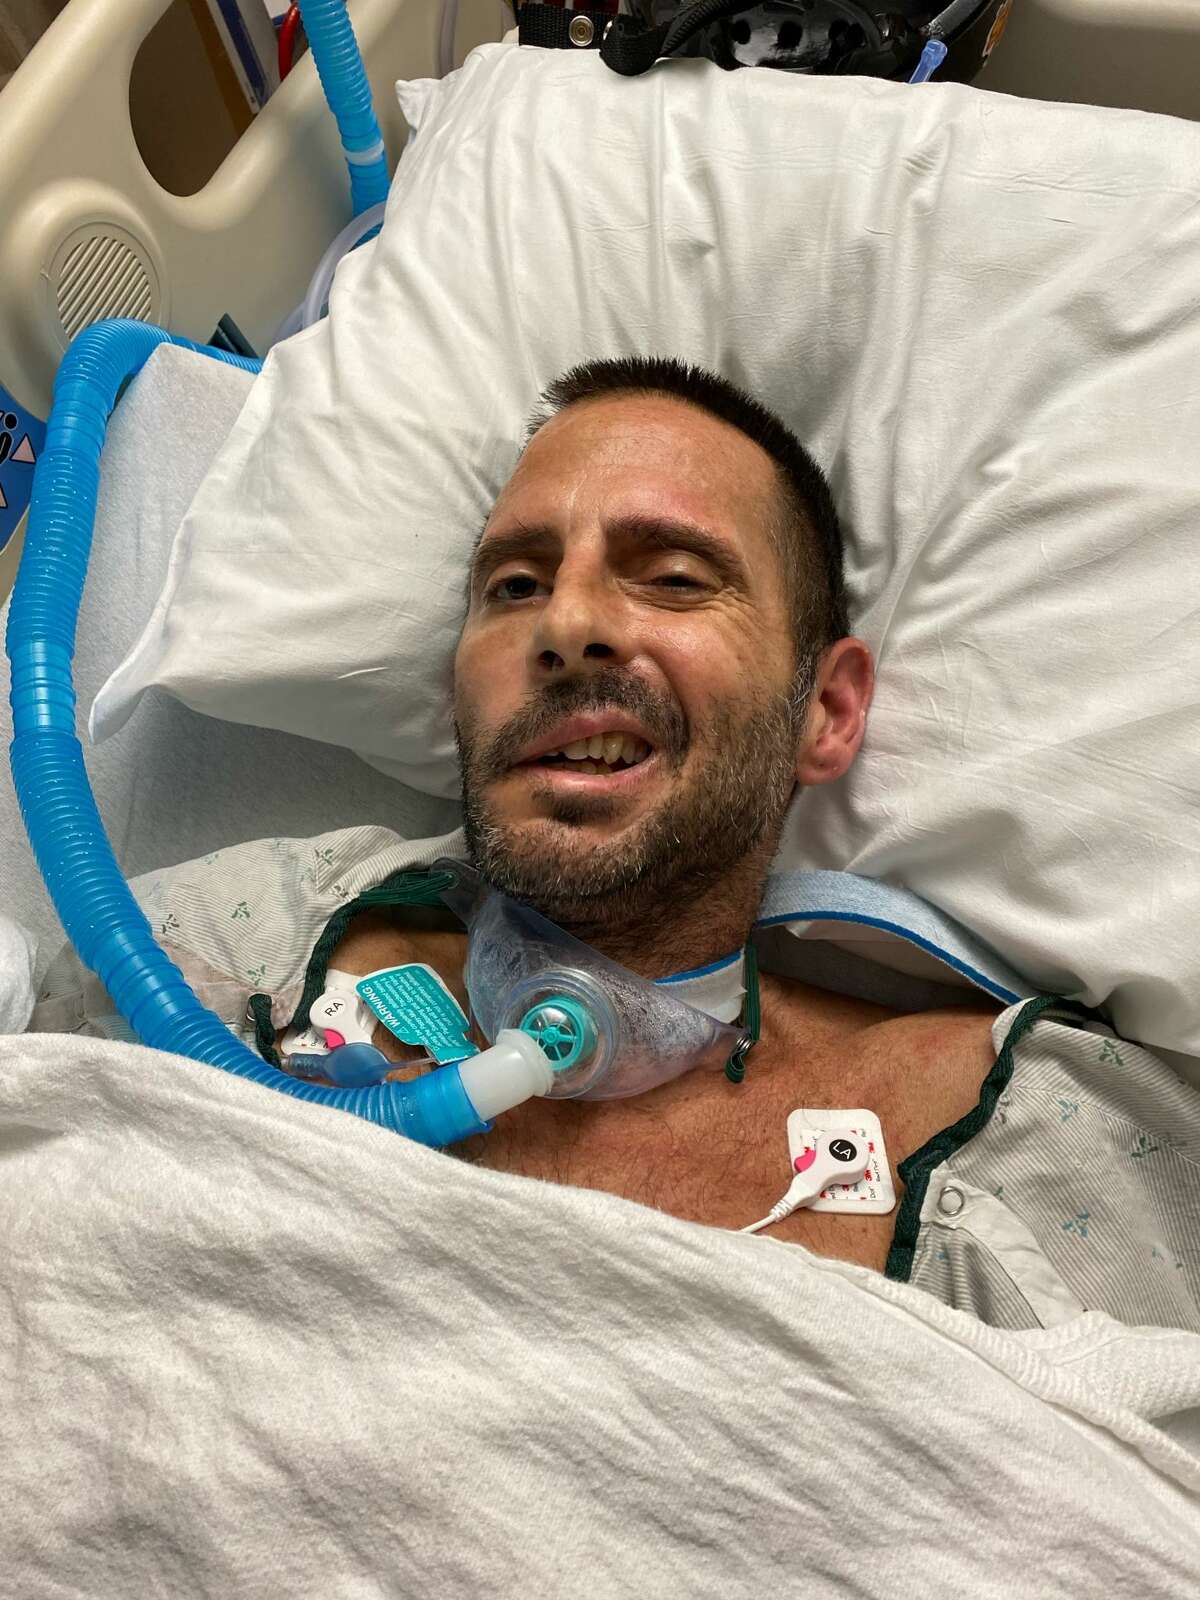 Chris Smith does his best to smile as he is cared for in an area hospital. Smith has made progress after being shot in the head the morning of Thanksgiving Day. His date, Leslie Reeves, was killed. Reeves' ex-boyfriend has been charged with three counts of first degree murder and one count of attempted first degree murder. 